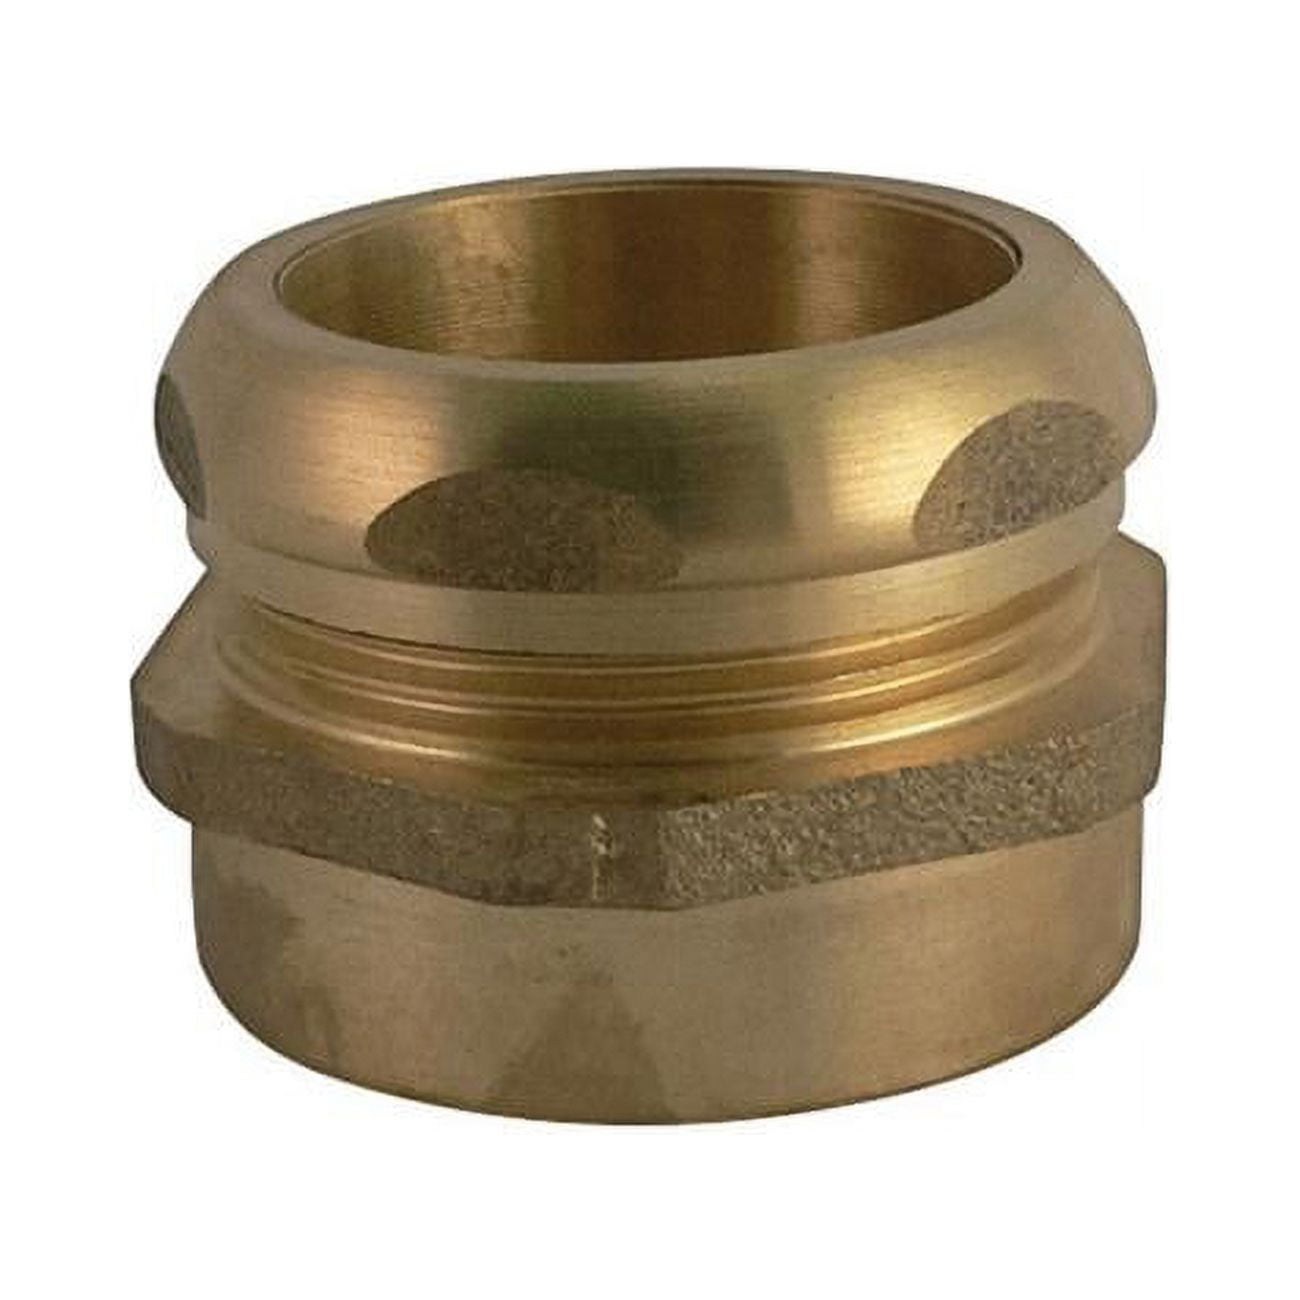 4834248 1.5 In. Dia. X 1.5 In. Chrome Waste Connector, Brass